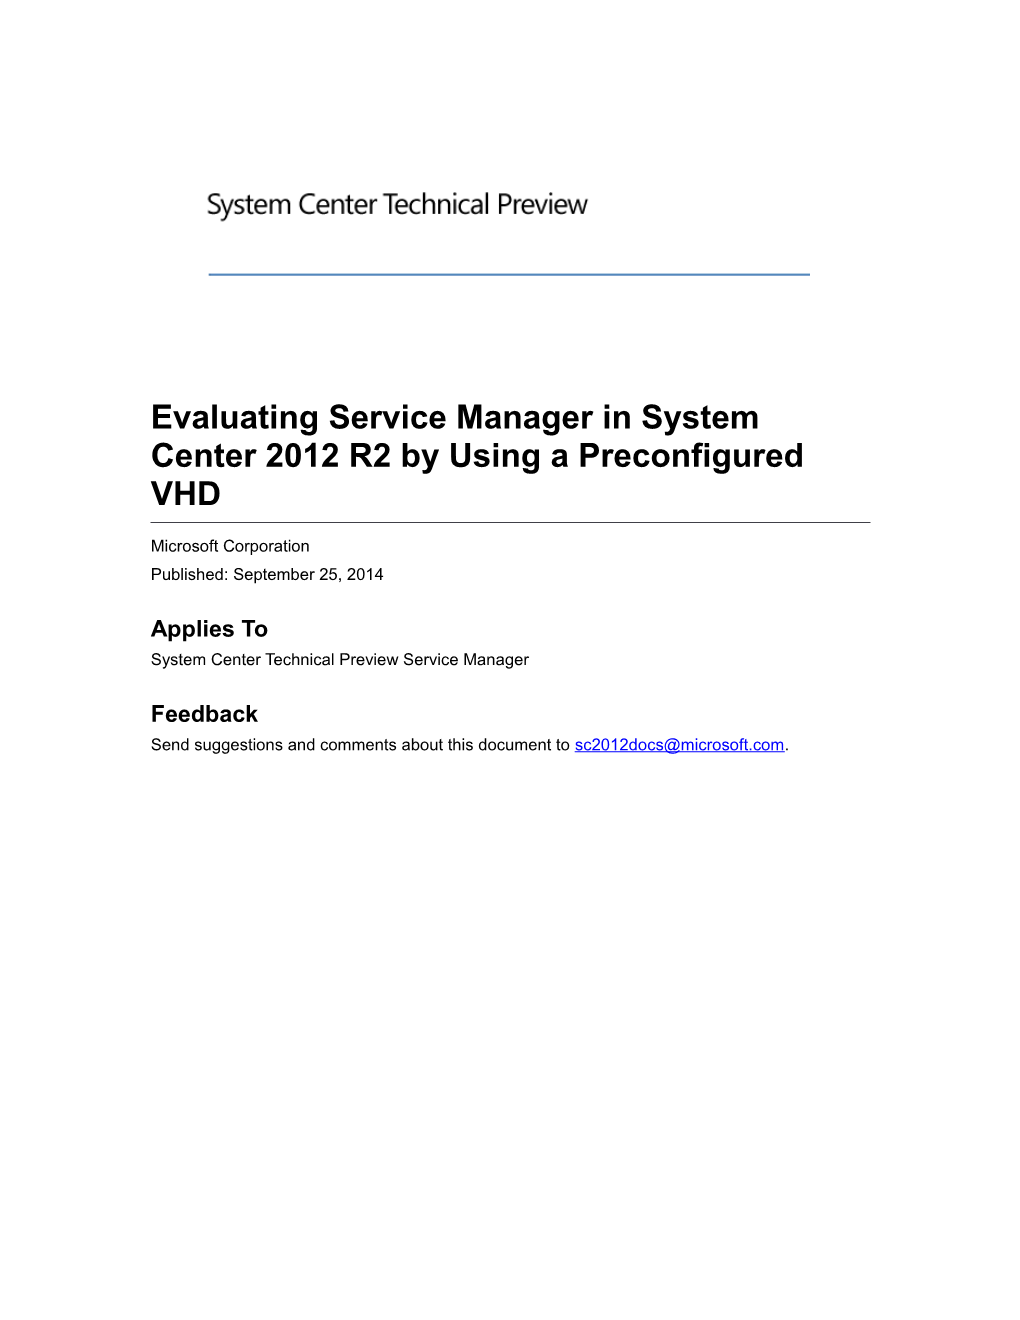 Evaluating Service Manager in System Center 2012 R2 by Using a Preconfigured VHD